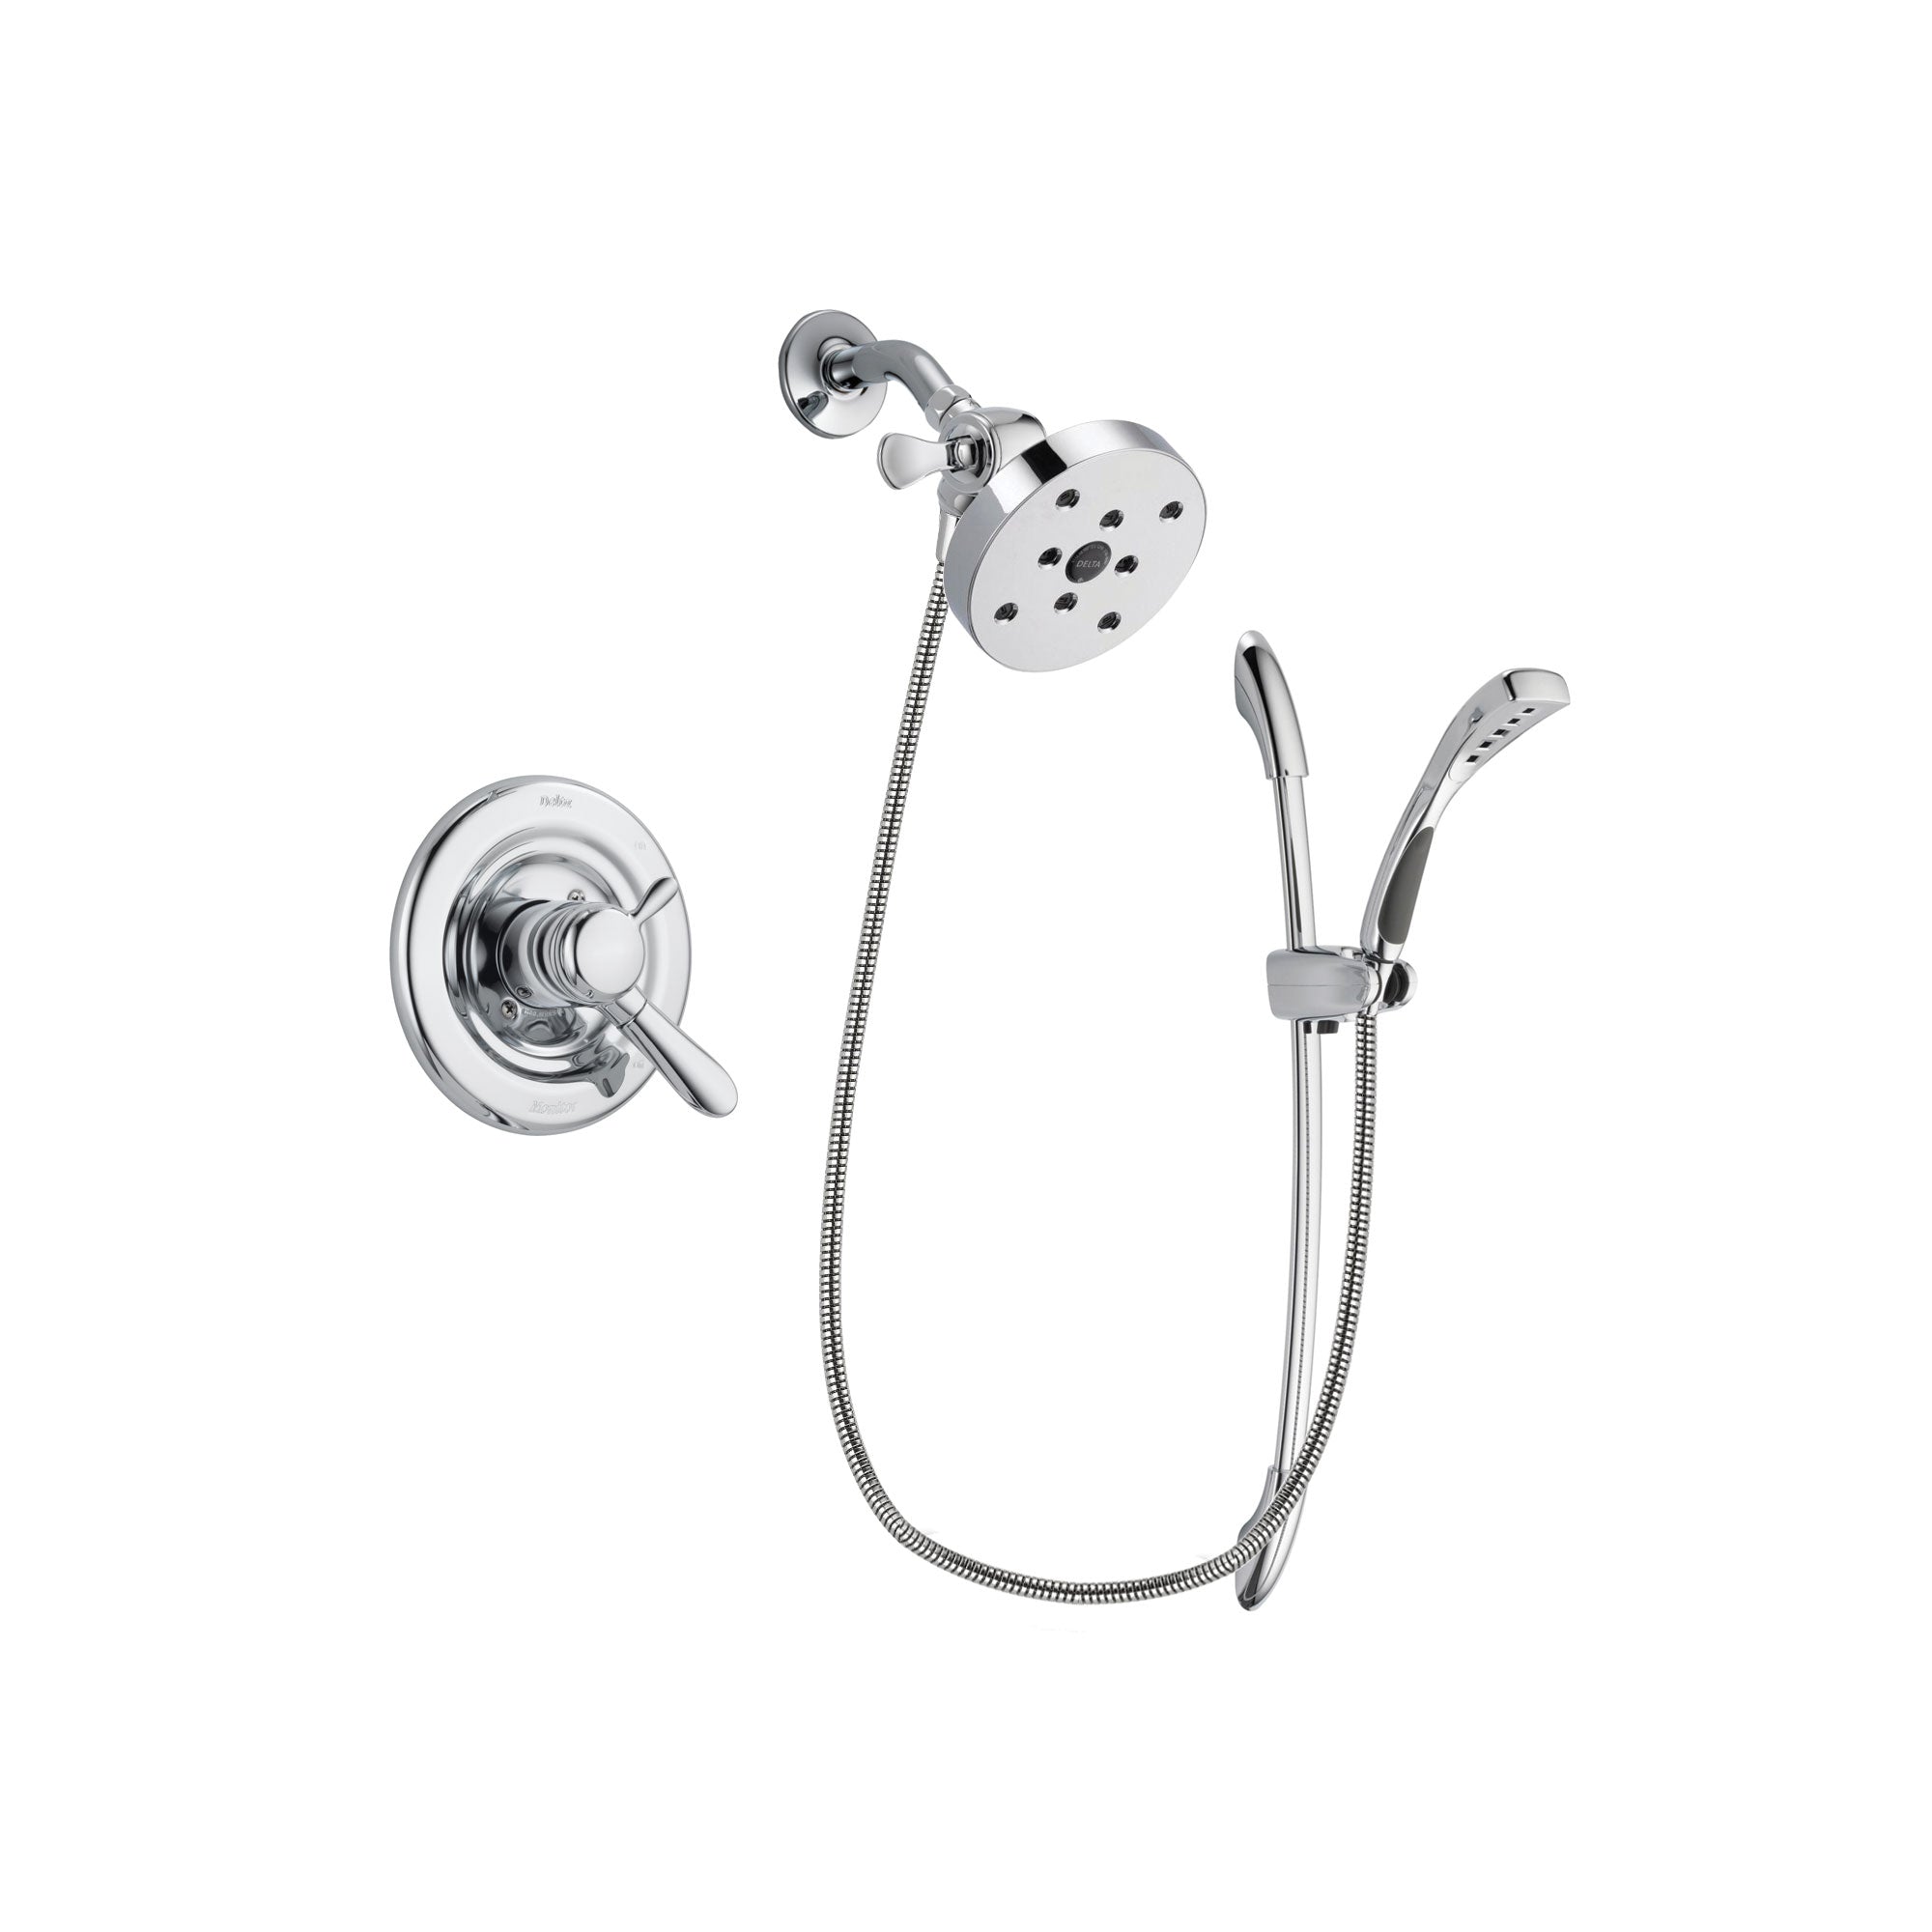 Delta Lahara Chrome Finish Dual Control Shower Faucet System Package with 5-1/2 inch Shower Head and Handheld Shower with Slide Bar Includes Rough-in Valve DSP0548V